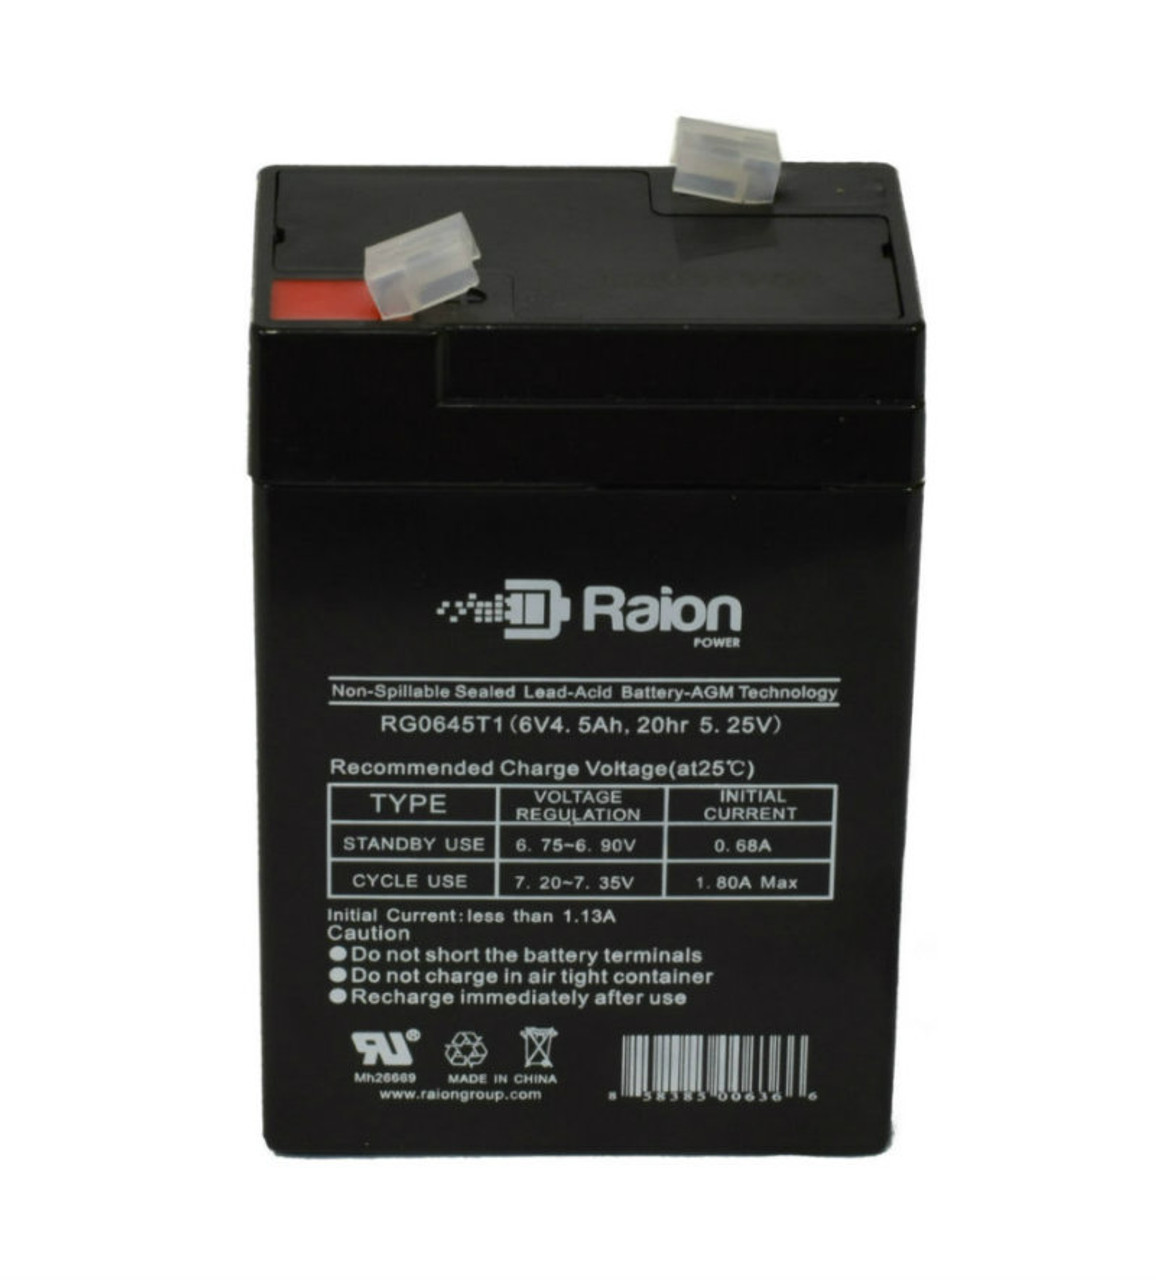 Raion Power RG0645T1 Replacement Battery Cartridge for Fengri 3-FM-4.0